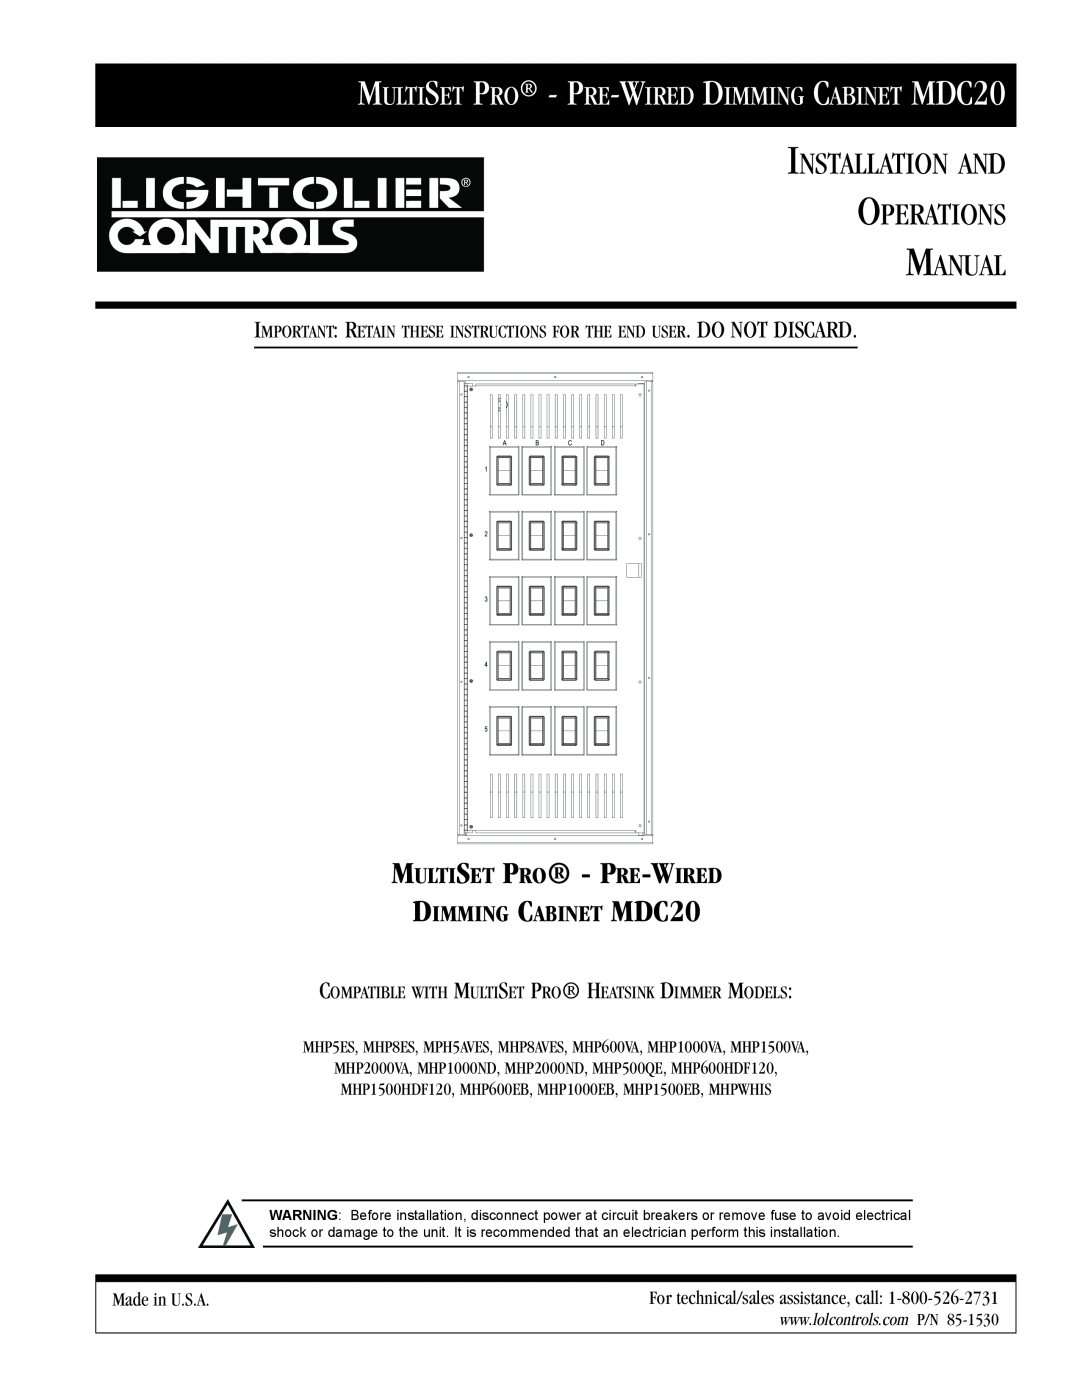 Lightolier manual MULTISET PRO - PRE-WIRED DIMMING CABINET MDC20, Installation And Operations Manual, Made in U.S.A 